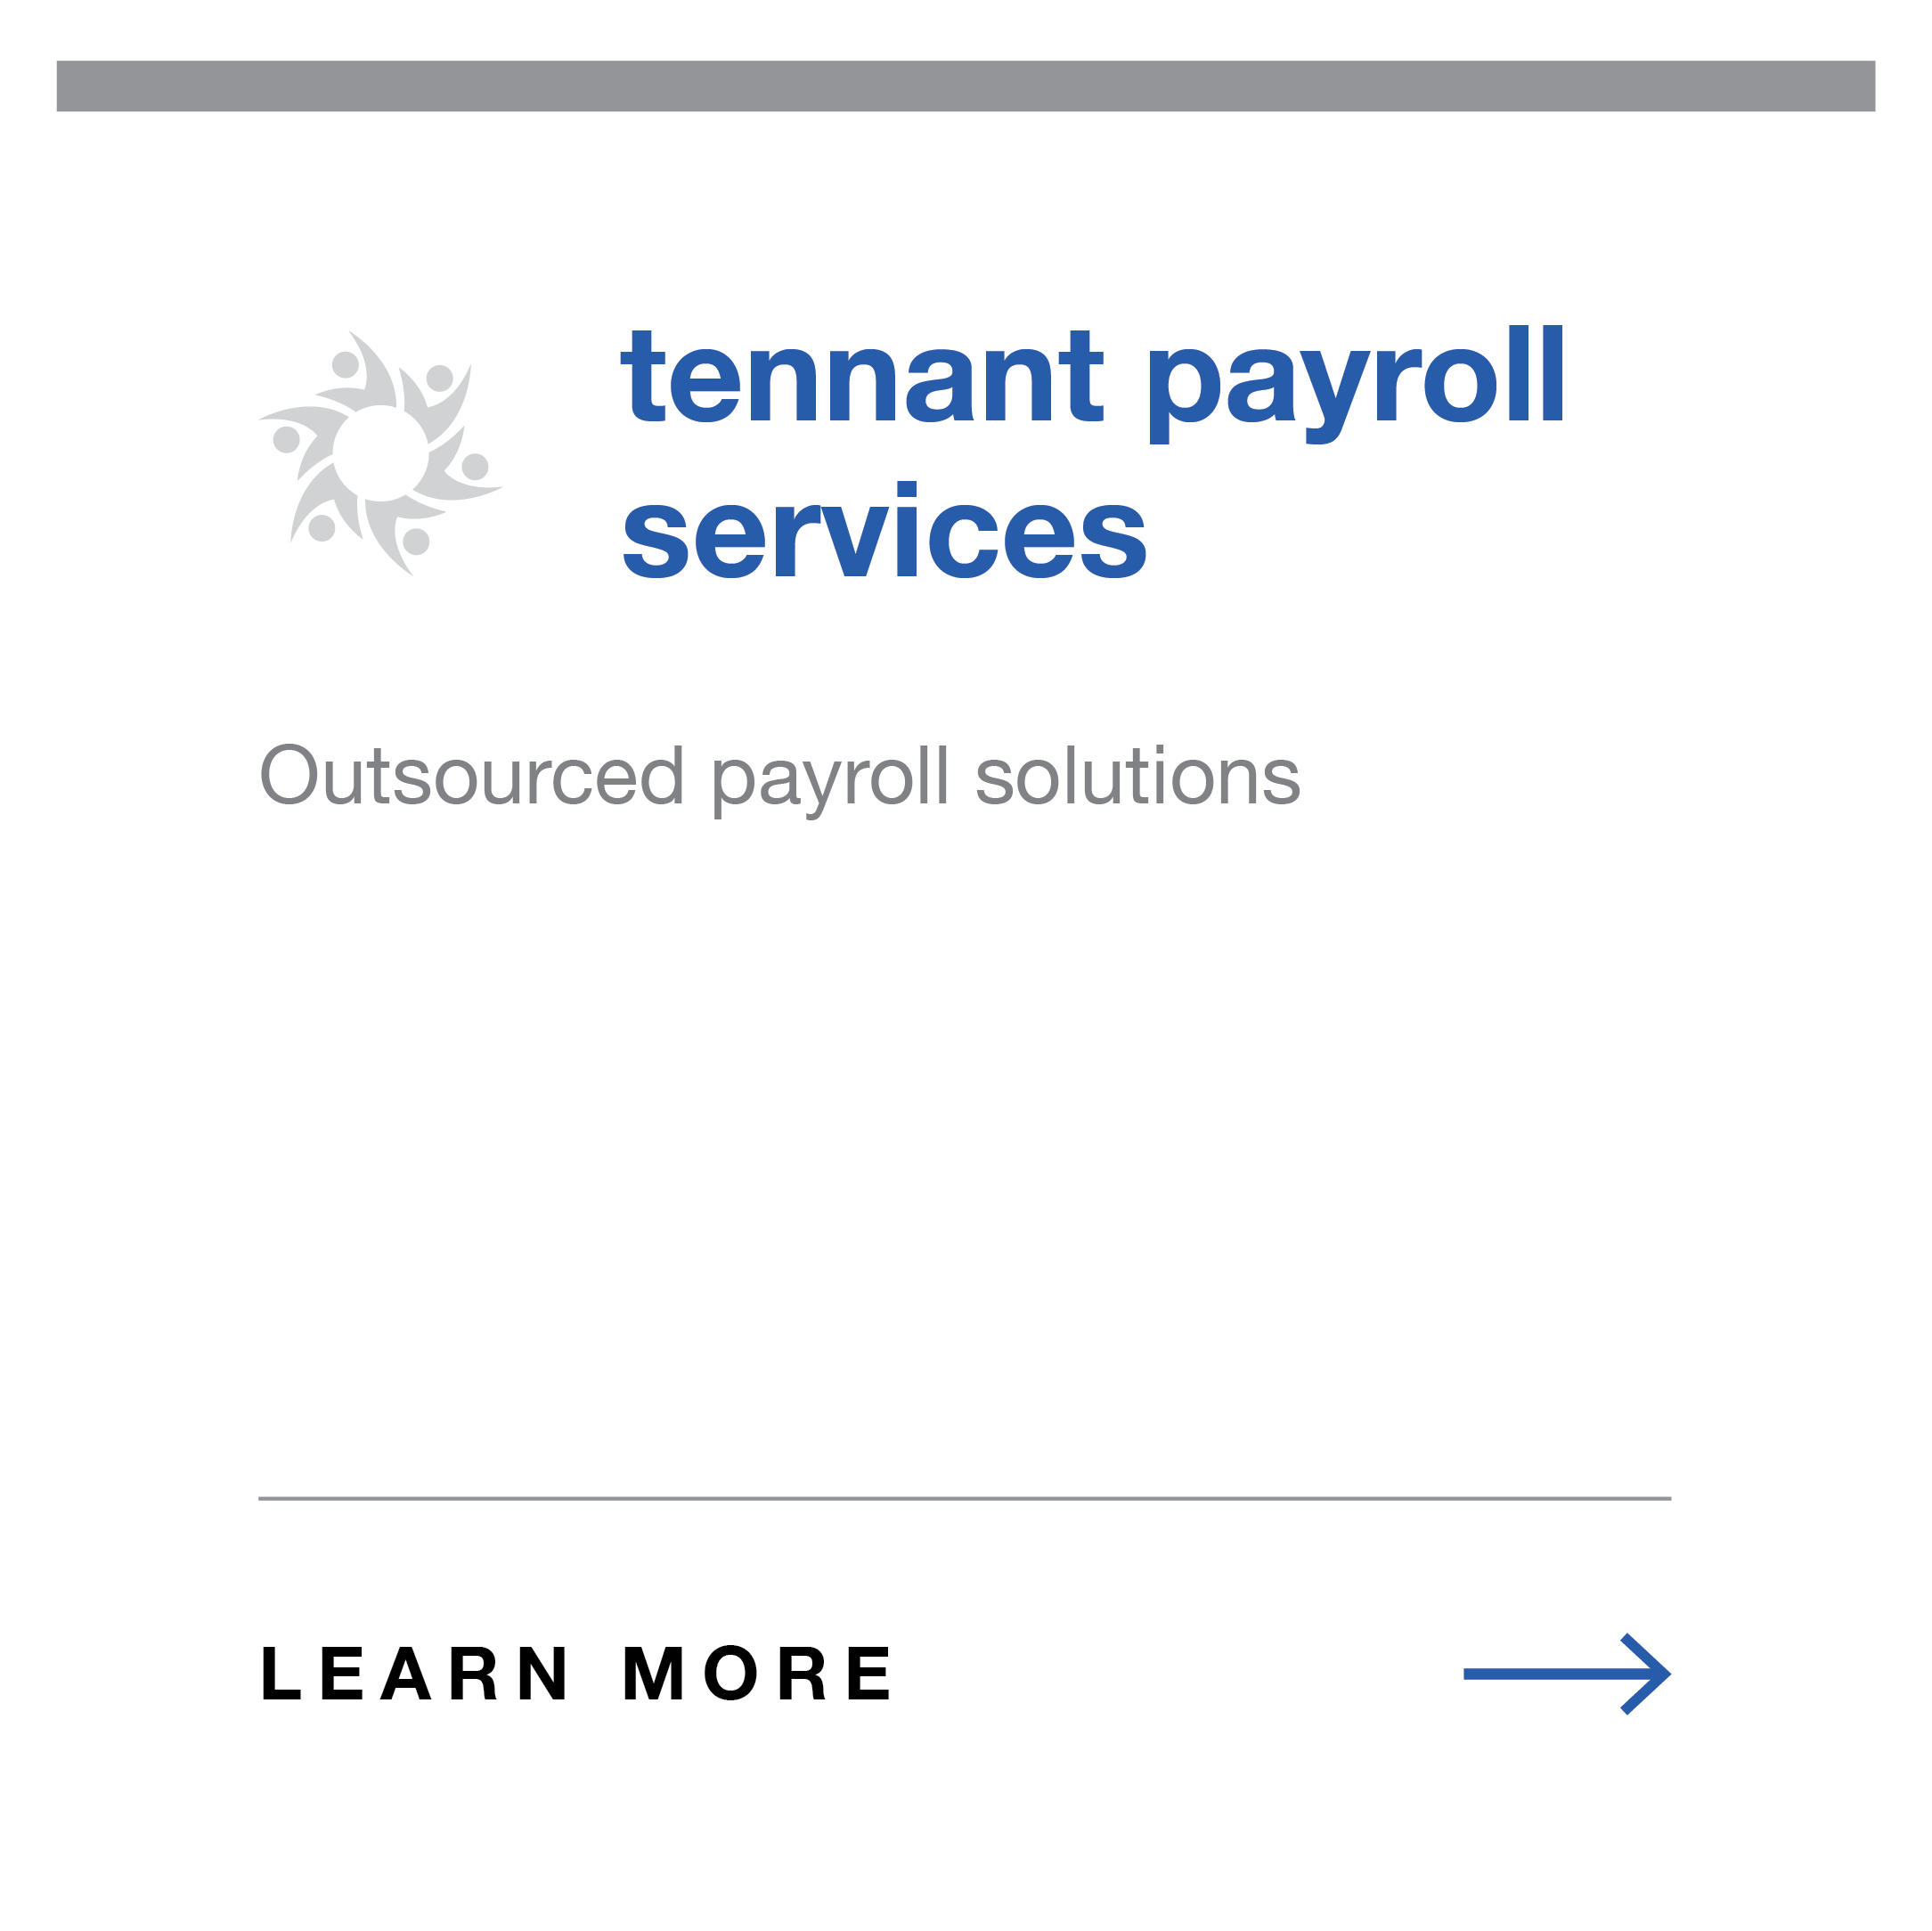 8-GroupServices-Payroll.png